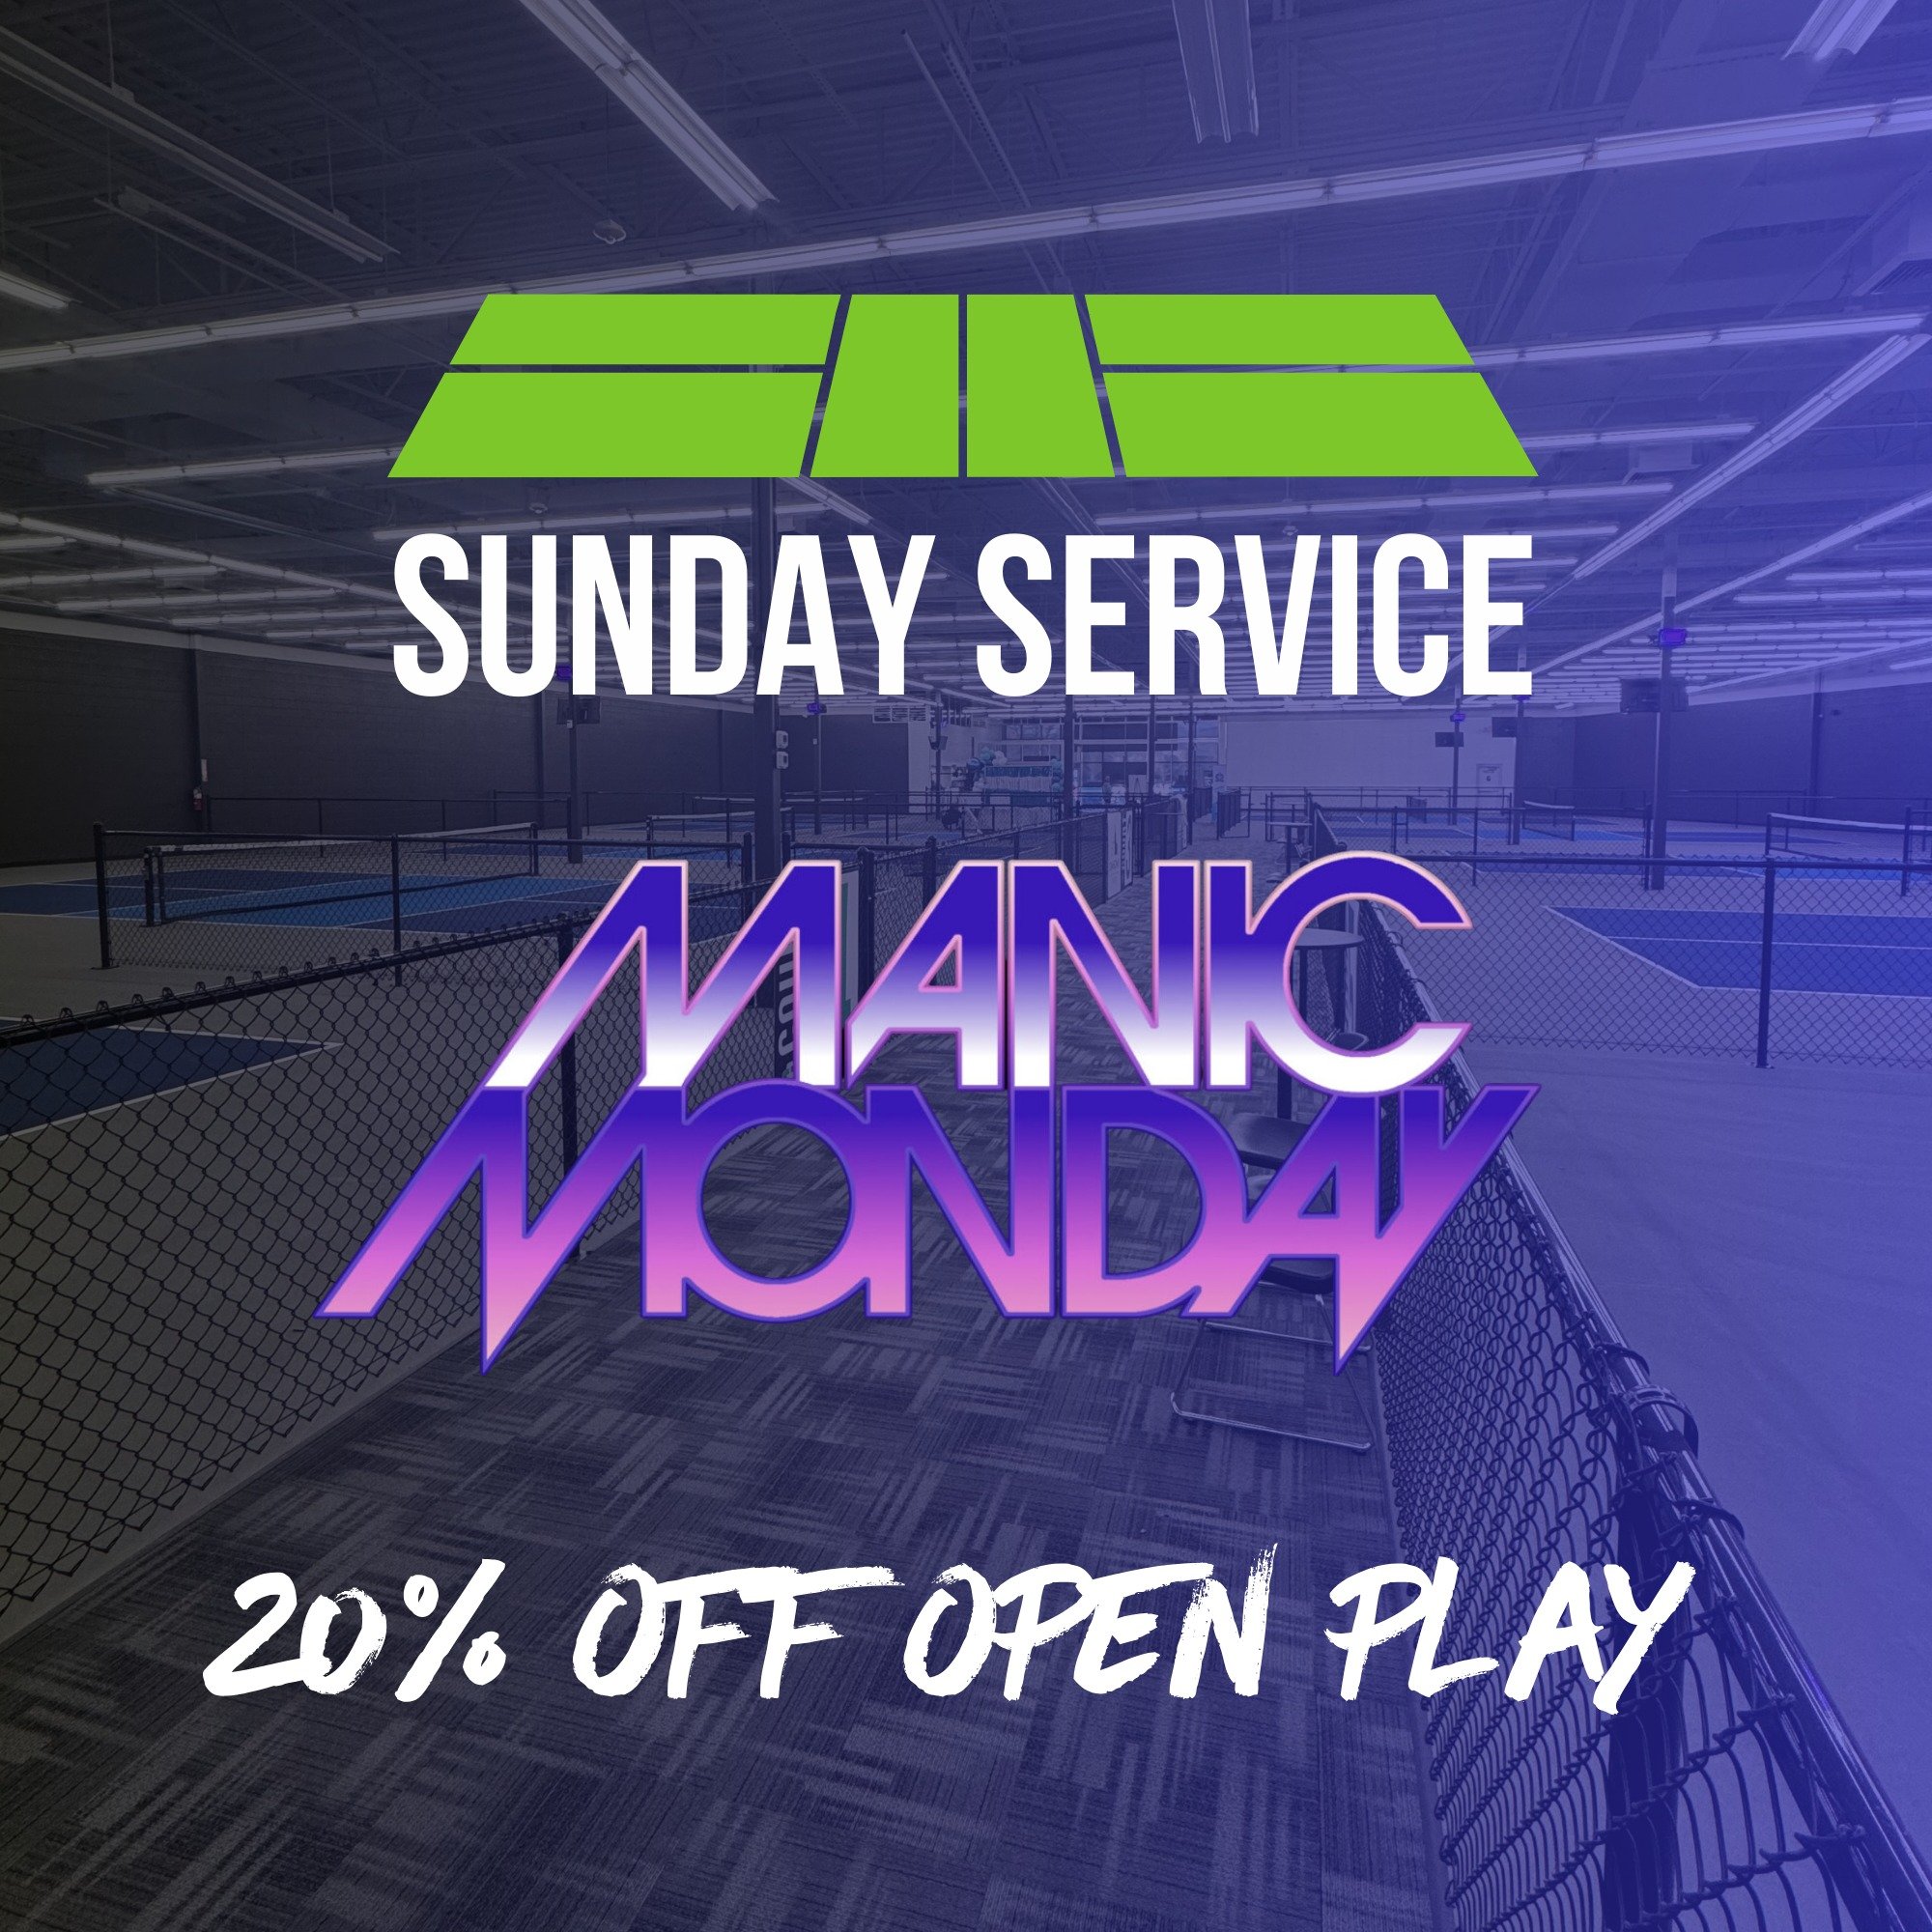 Don't forget! Our Sunday and Monday Open Play Sessions are 20% off! 
.
Sunday Service
7 a.m. to 10 a.m.
5 p.m. to 8 p.m.
.
Manic Mondays
6 a.m. to 9 a.m.
9 a.m. to noon
1 p.m. to 4 p.m.
7 p.m. to 10 p.m.
.
#weatherproof #cerfewproof #playmorepickleba